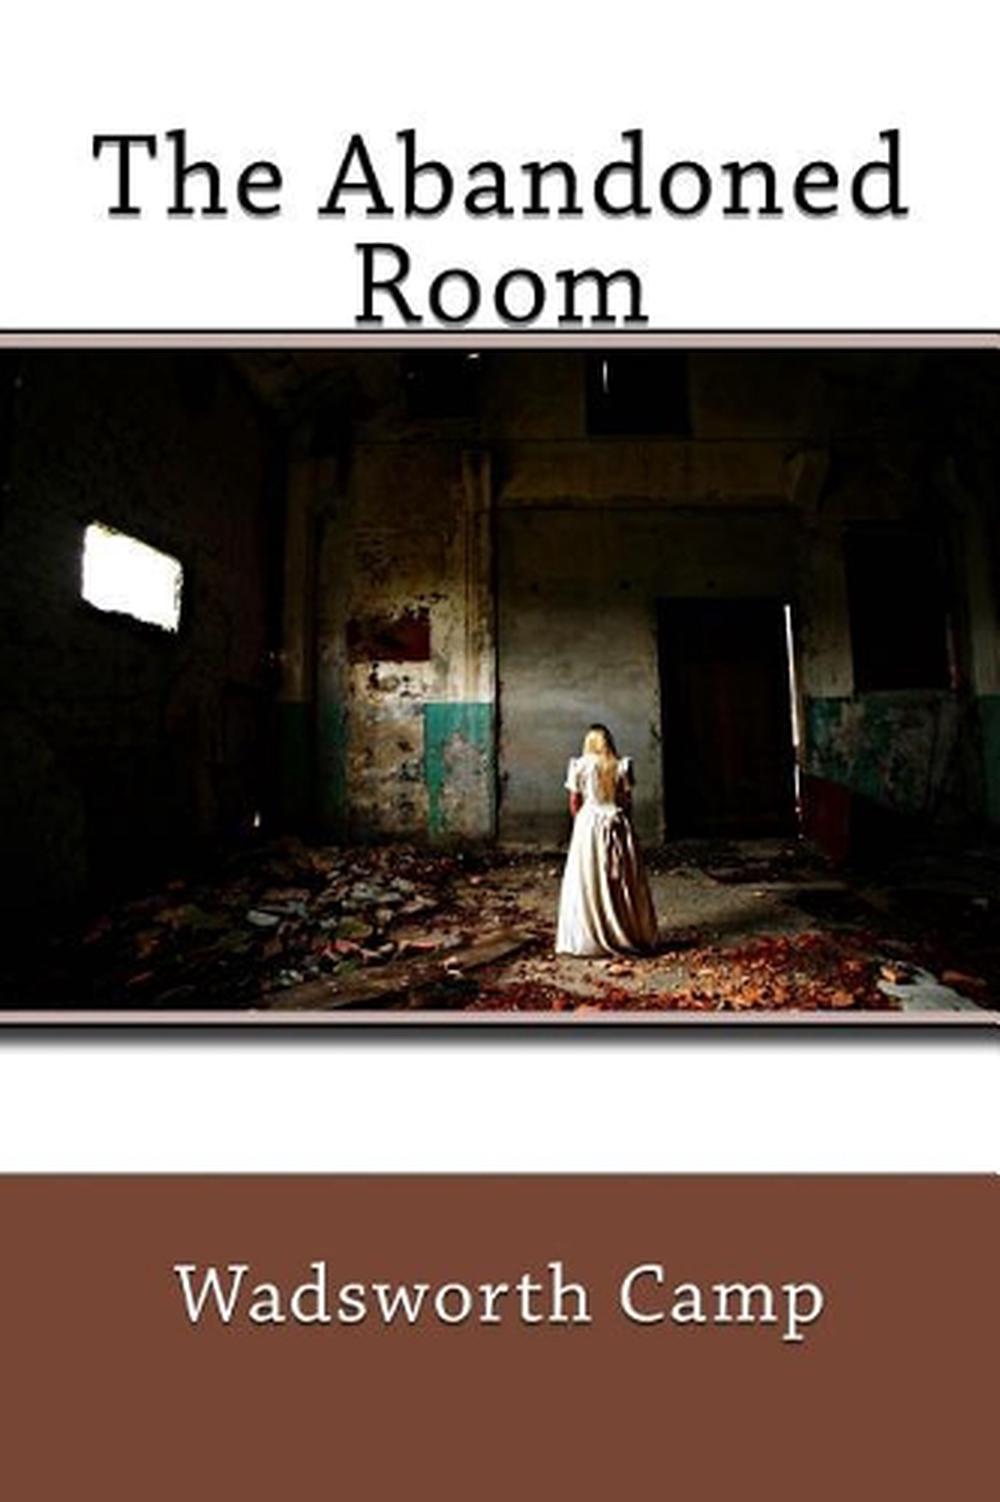 The Abandoned Room by Wadsworth Camp (English) Paperback Book Free